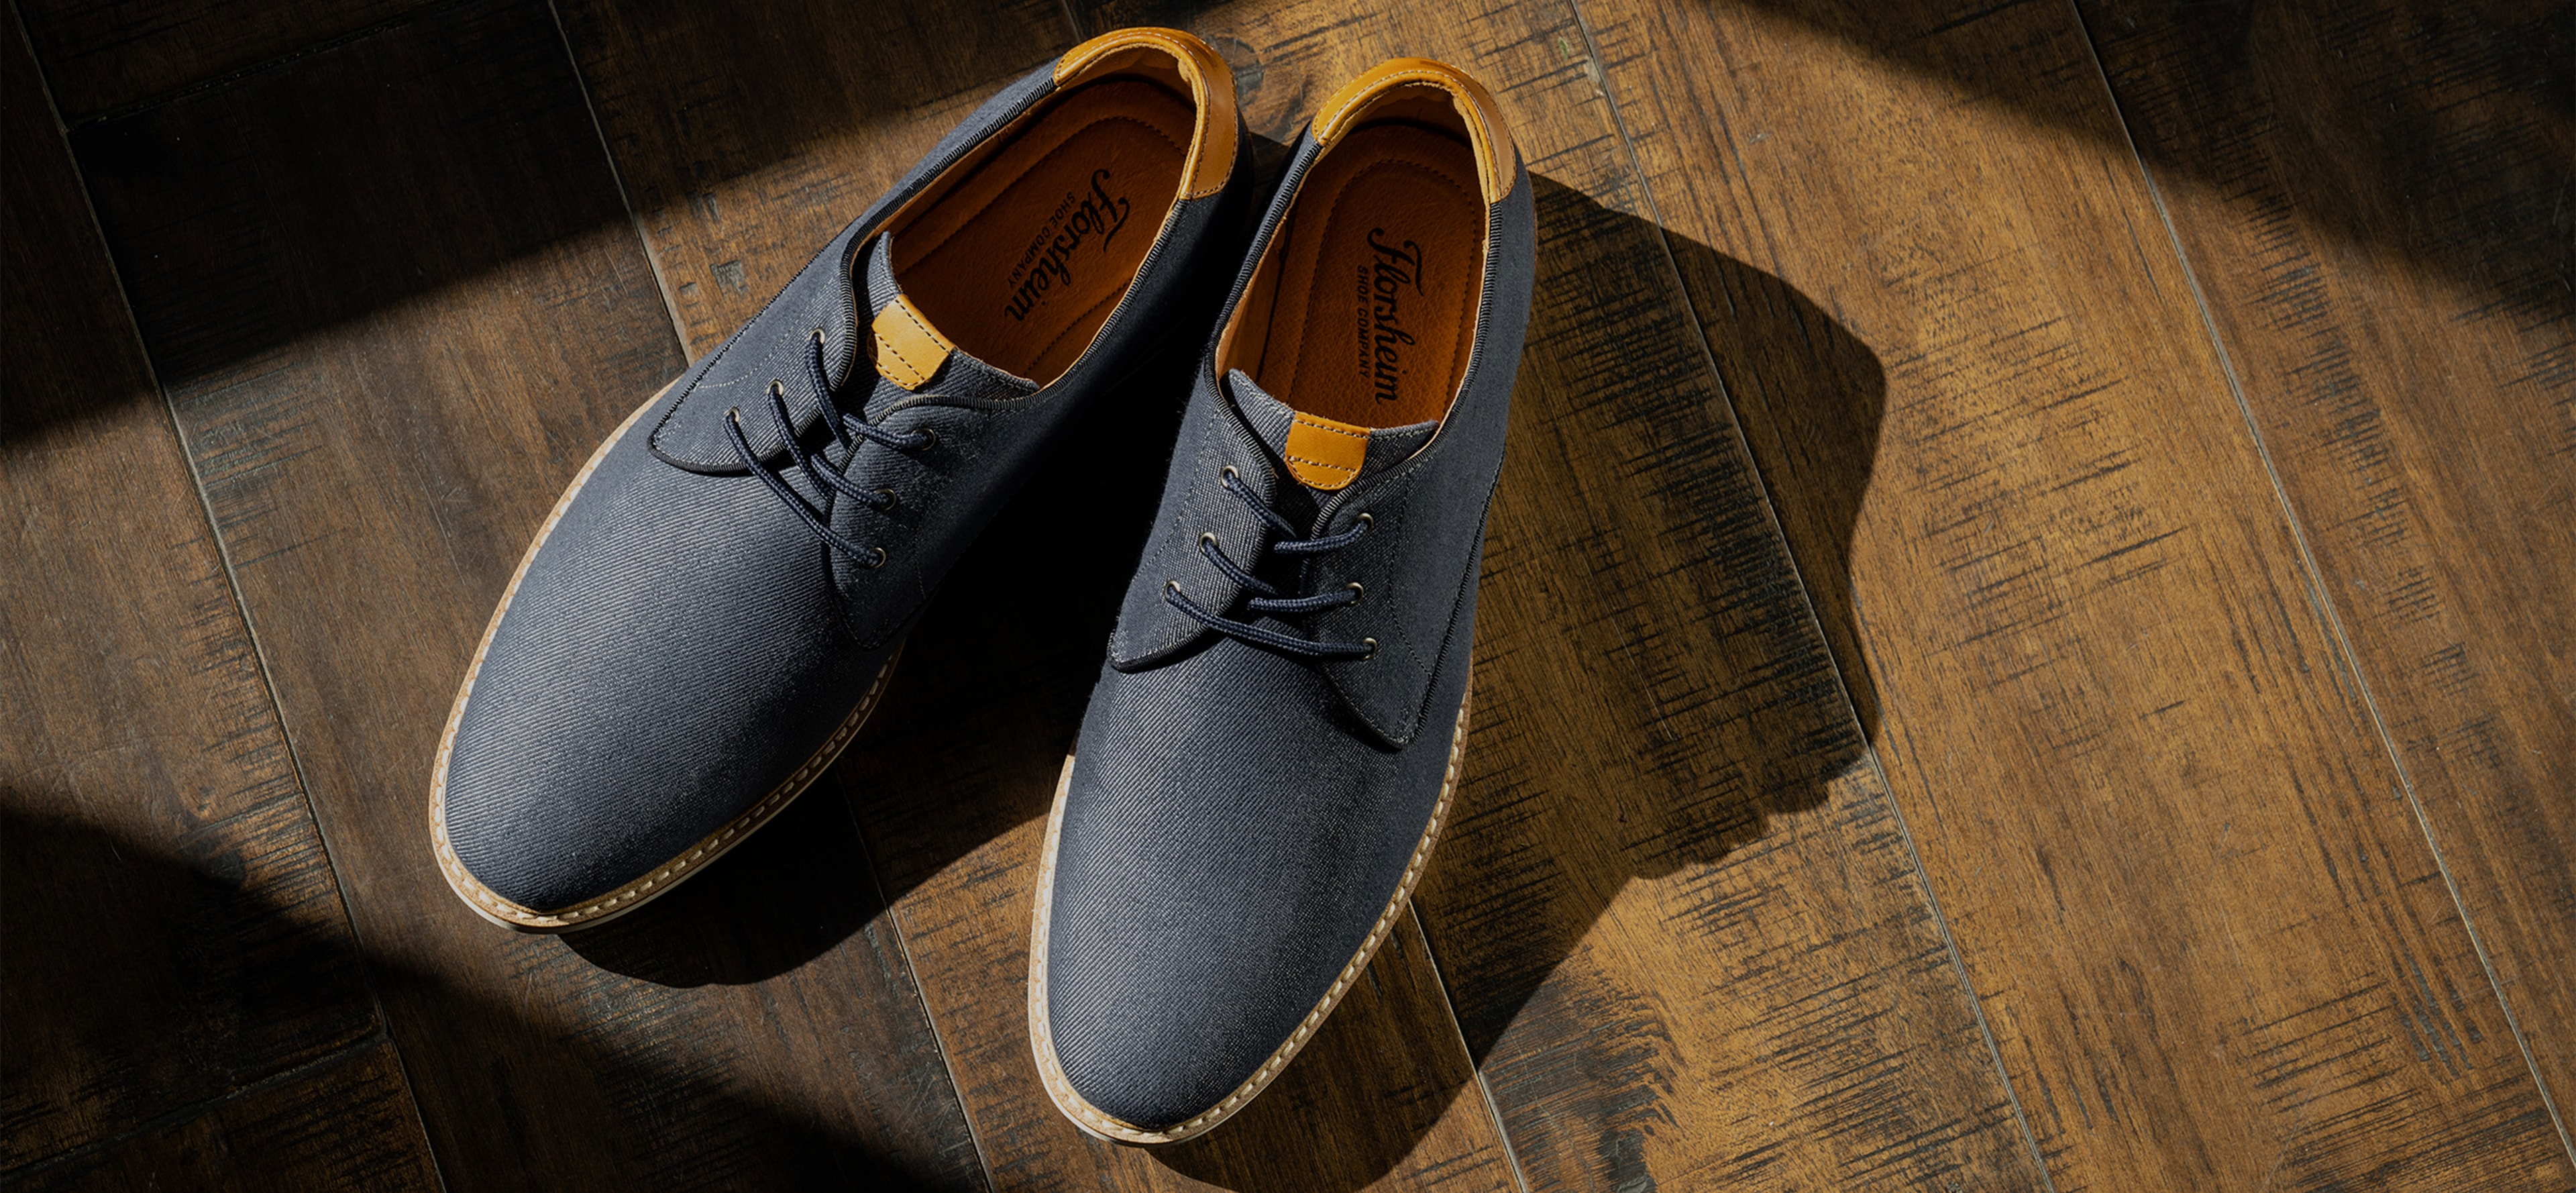 The featured shoe in this image is the Highland Canvas Plain Toe Oxford in Navy.